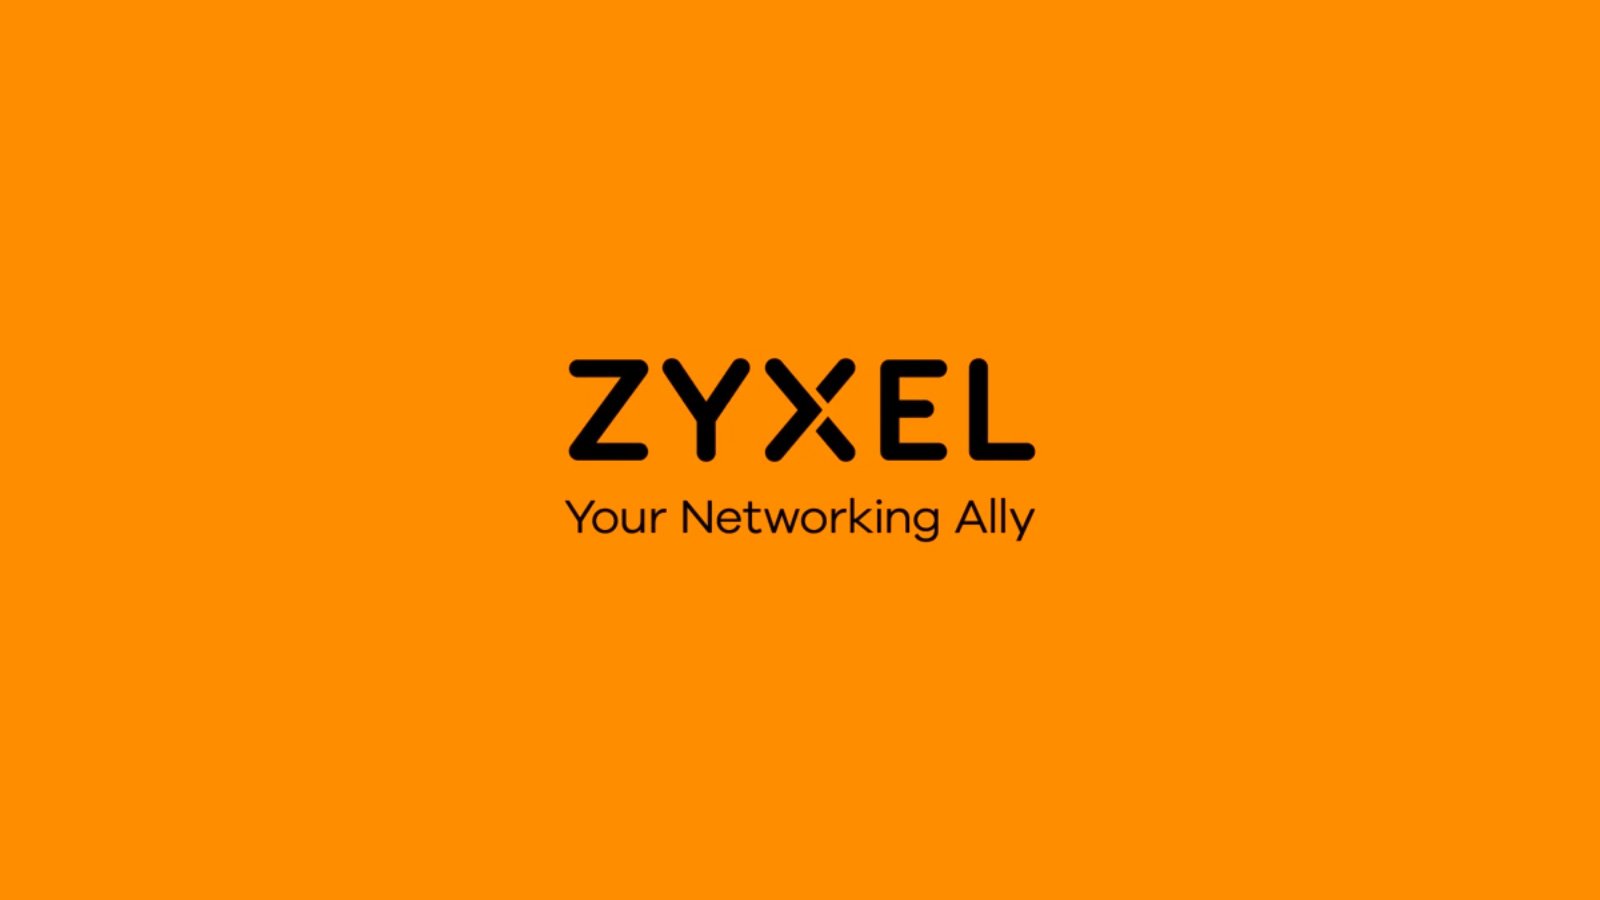 Zyxel warns of assorted analytical vulnerabilities in NAS devices